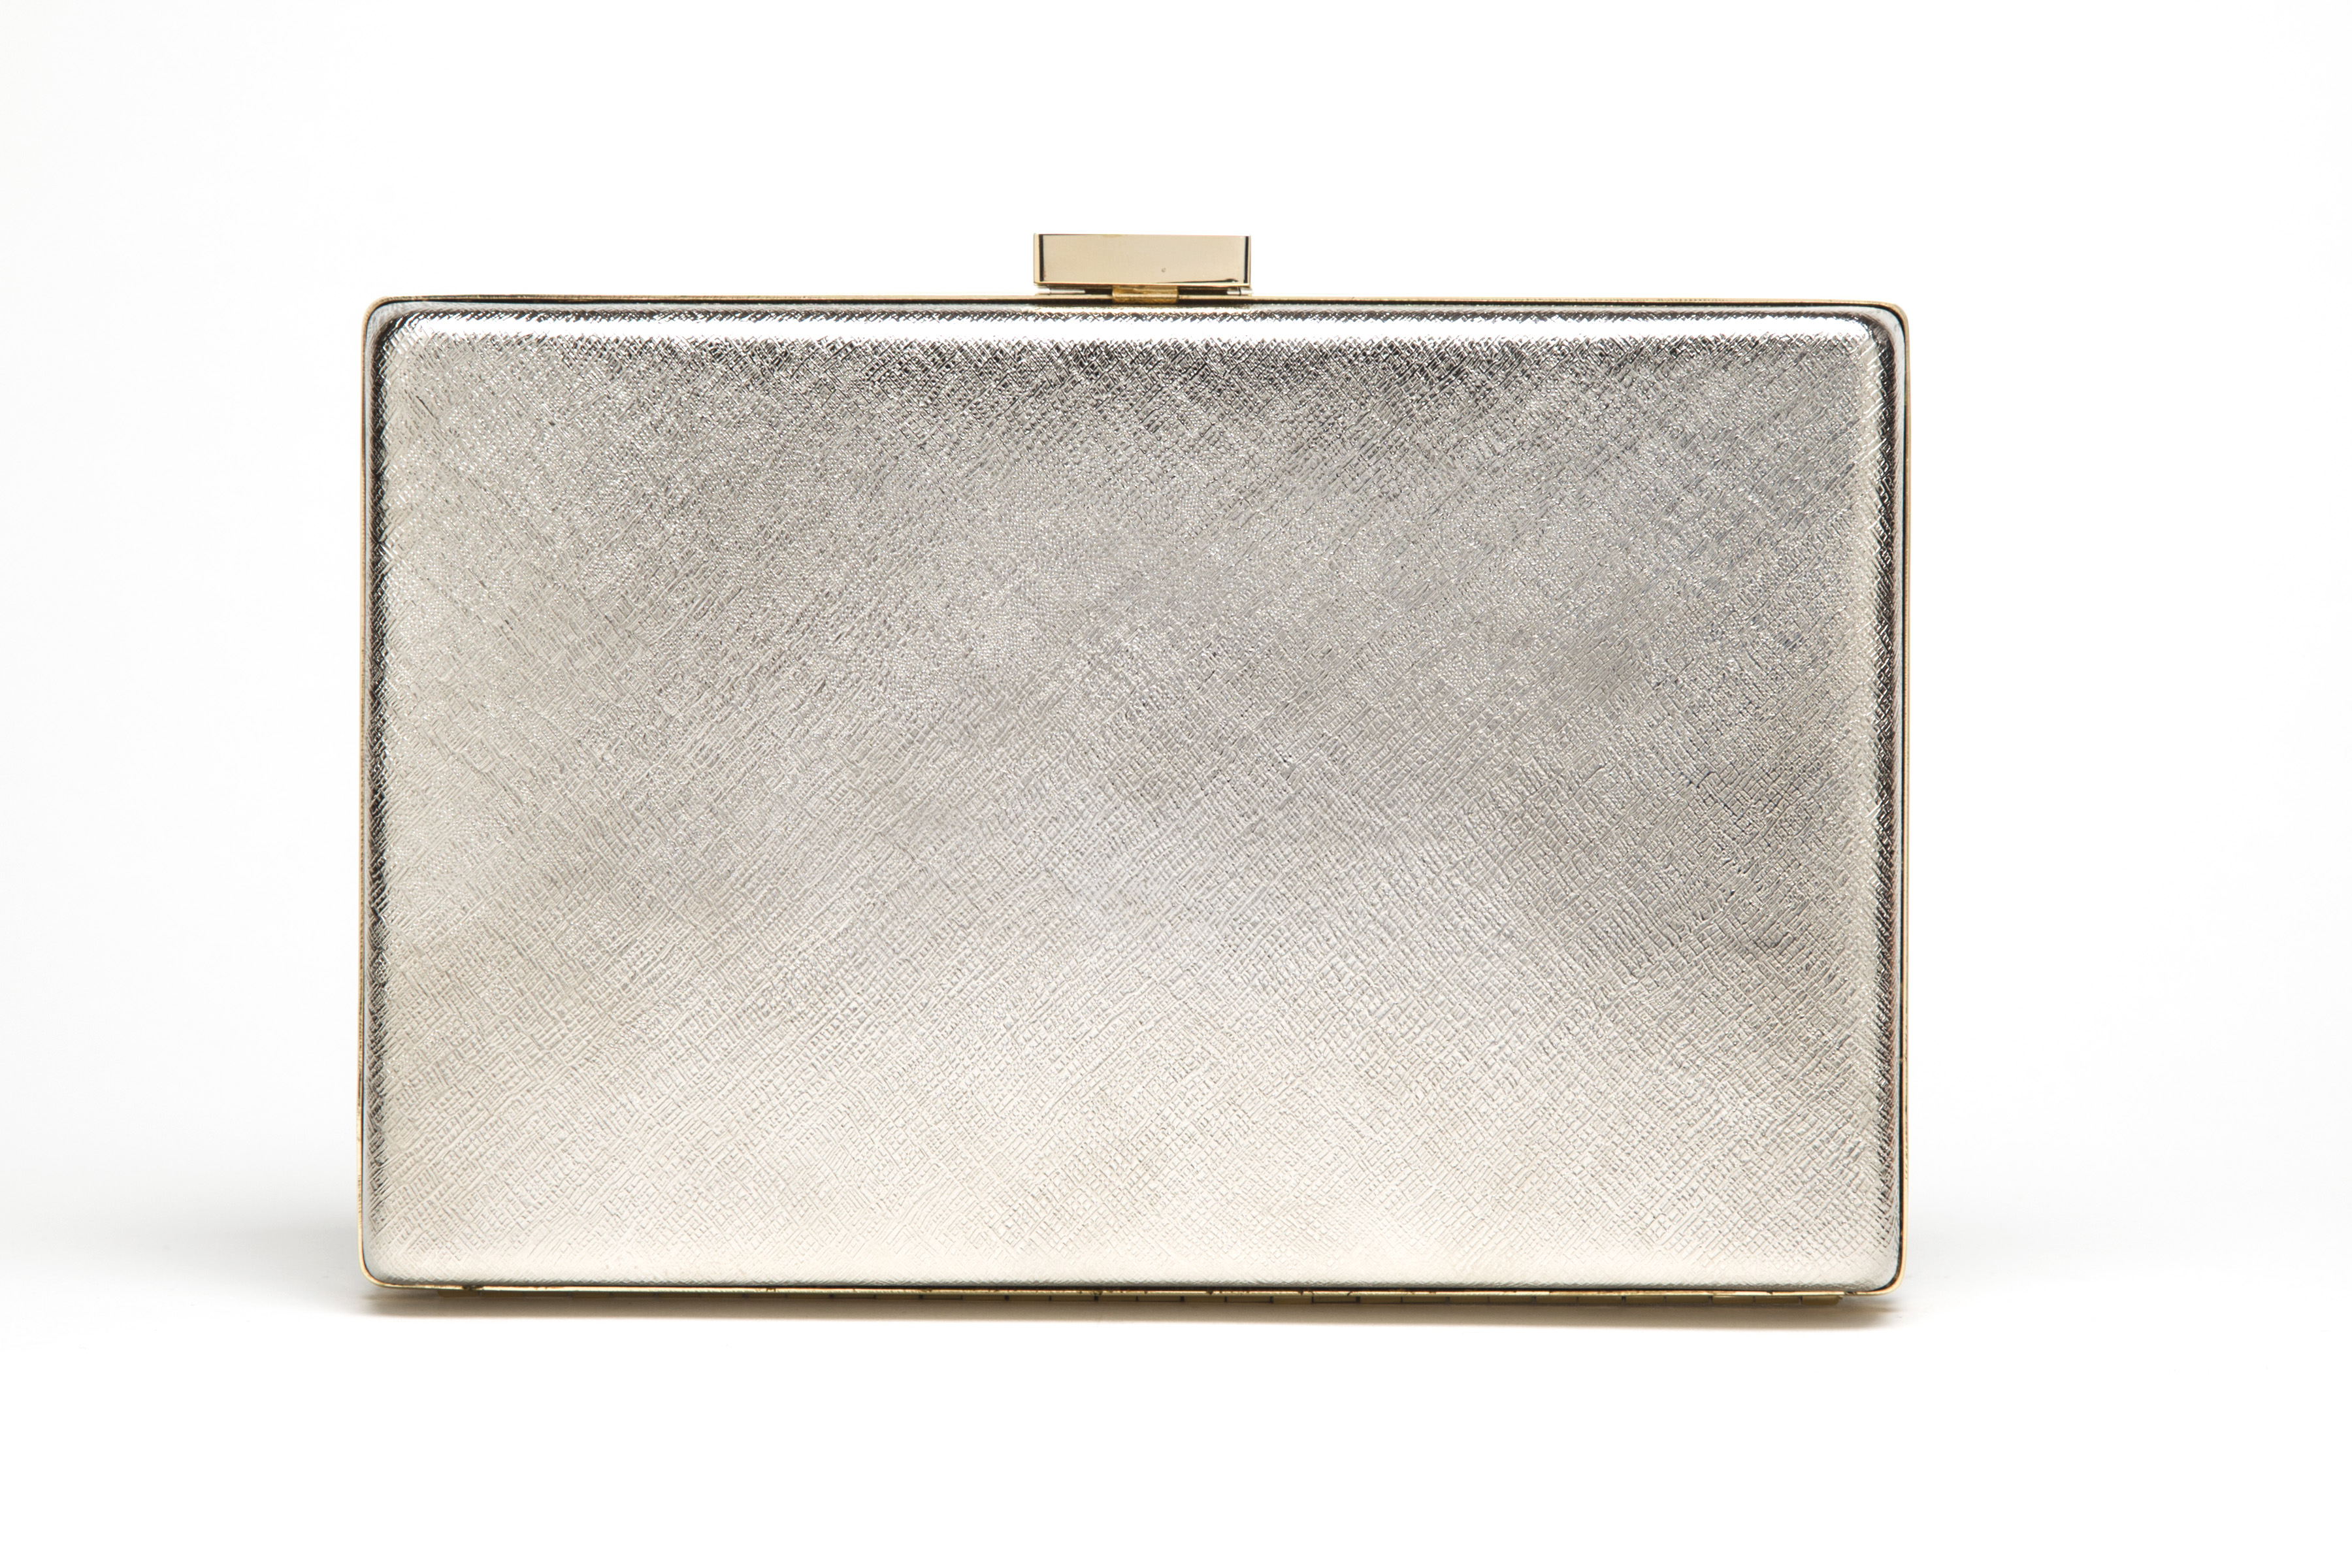 Jill Milan Art Deco Clutch in brushed silver with gold